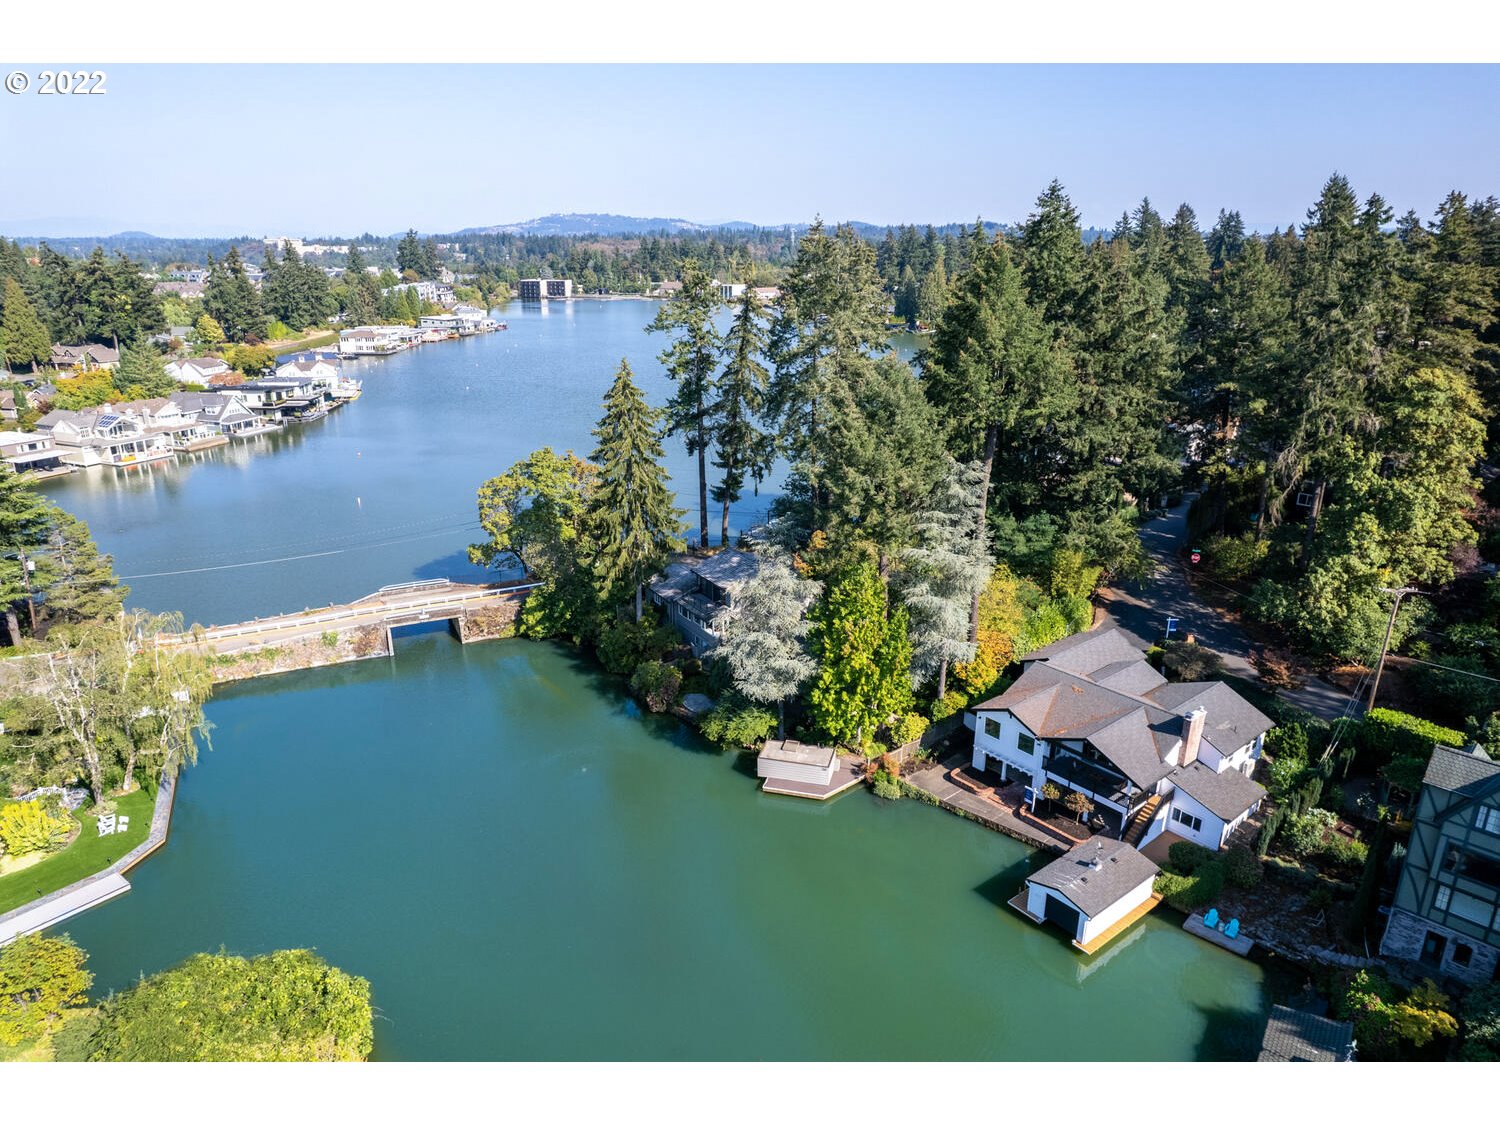 The coveted lakefront lifestyle awaits in this sleekly remodeled main level living refuge on Oswego Lake's Half Moon Bay!Step out your back door & into the lake w/private dock,boathouse,idyllic patios & covered deck.Enjoy gorgeous views from virtually every room, mid-century mod finishes & plank floors, picture windows & a wonderful open floor plan. Sunsets on the lake w/your favorite libation, tranquil waterfront living & a short stroll to vibrant downtown LO dining, shopping & farmer's market!